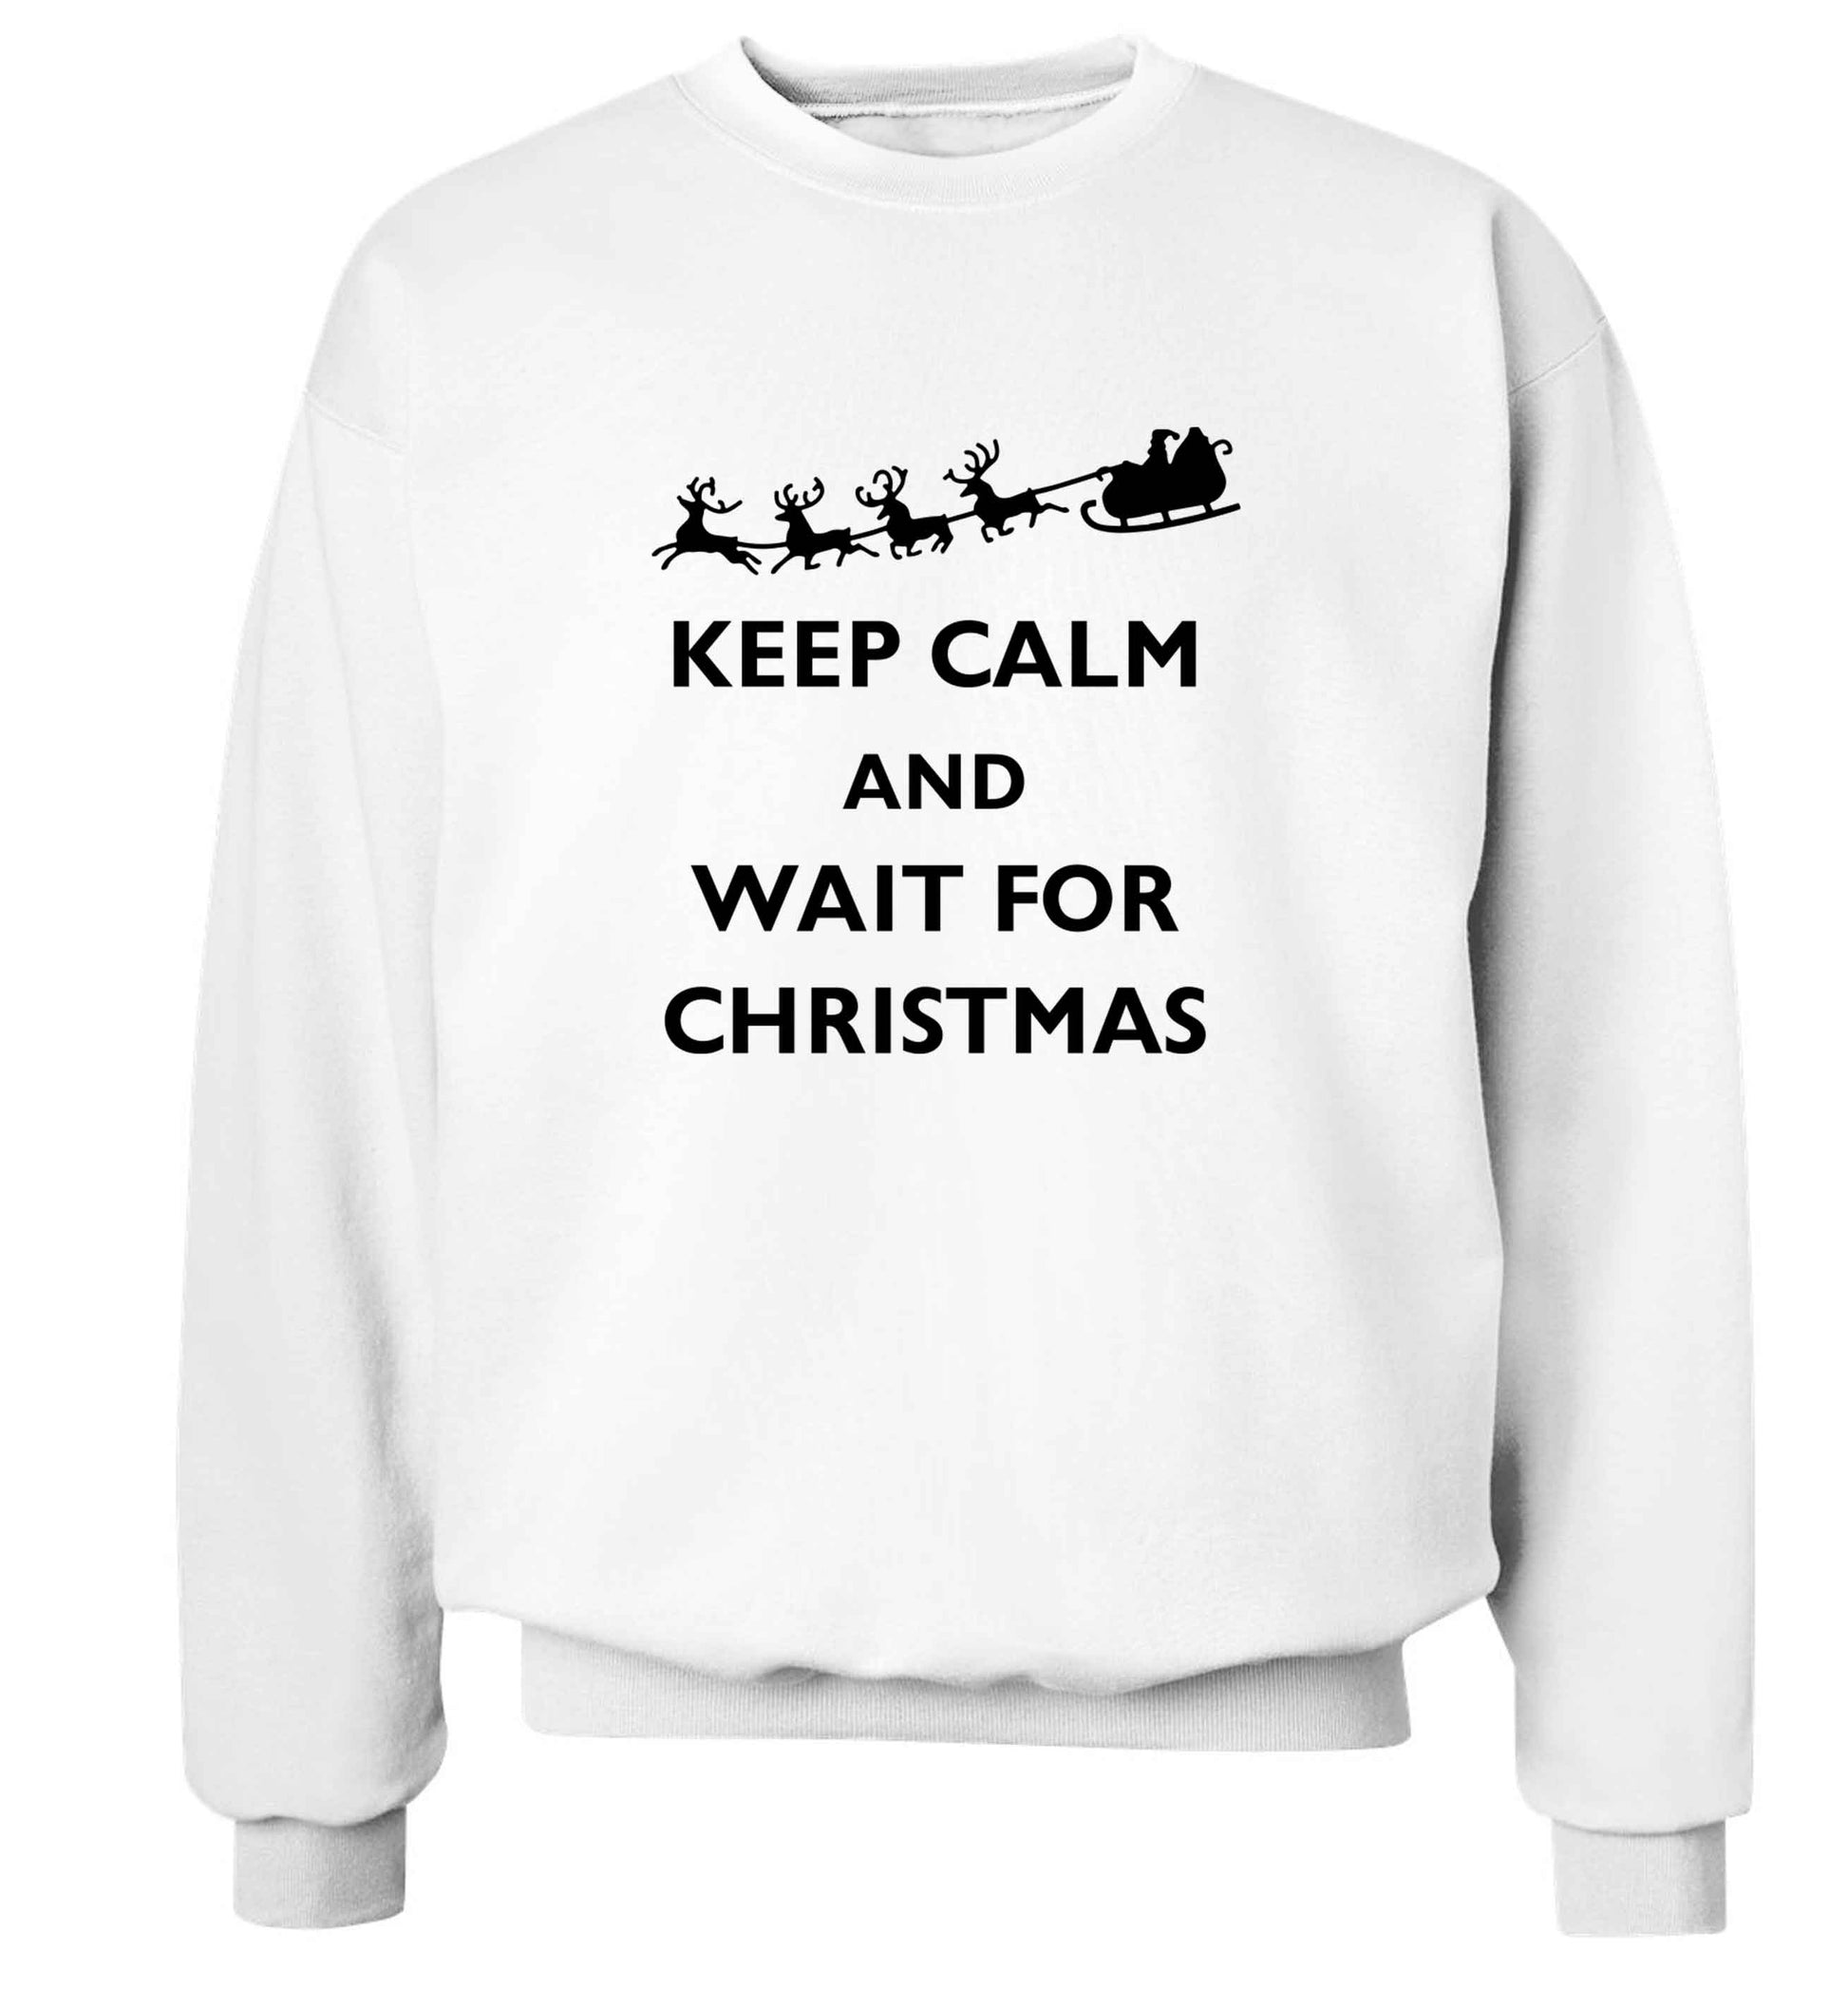 Keep calm and wait for Christmas adult's unisex white sweater 2XL